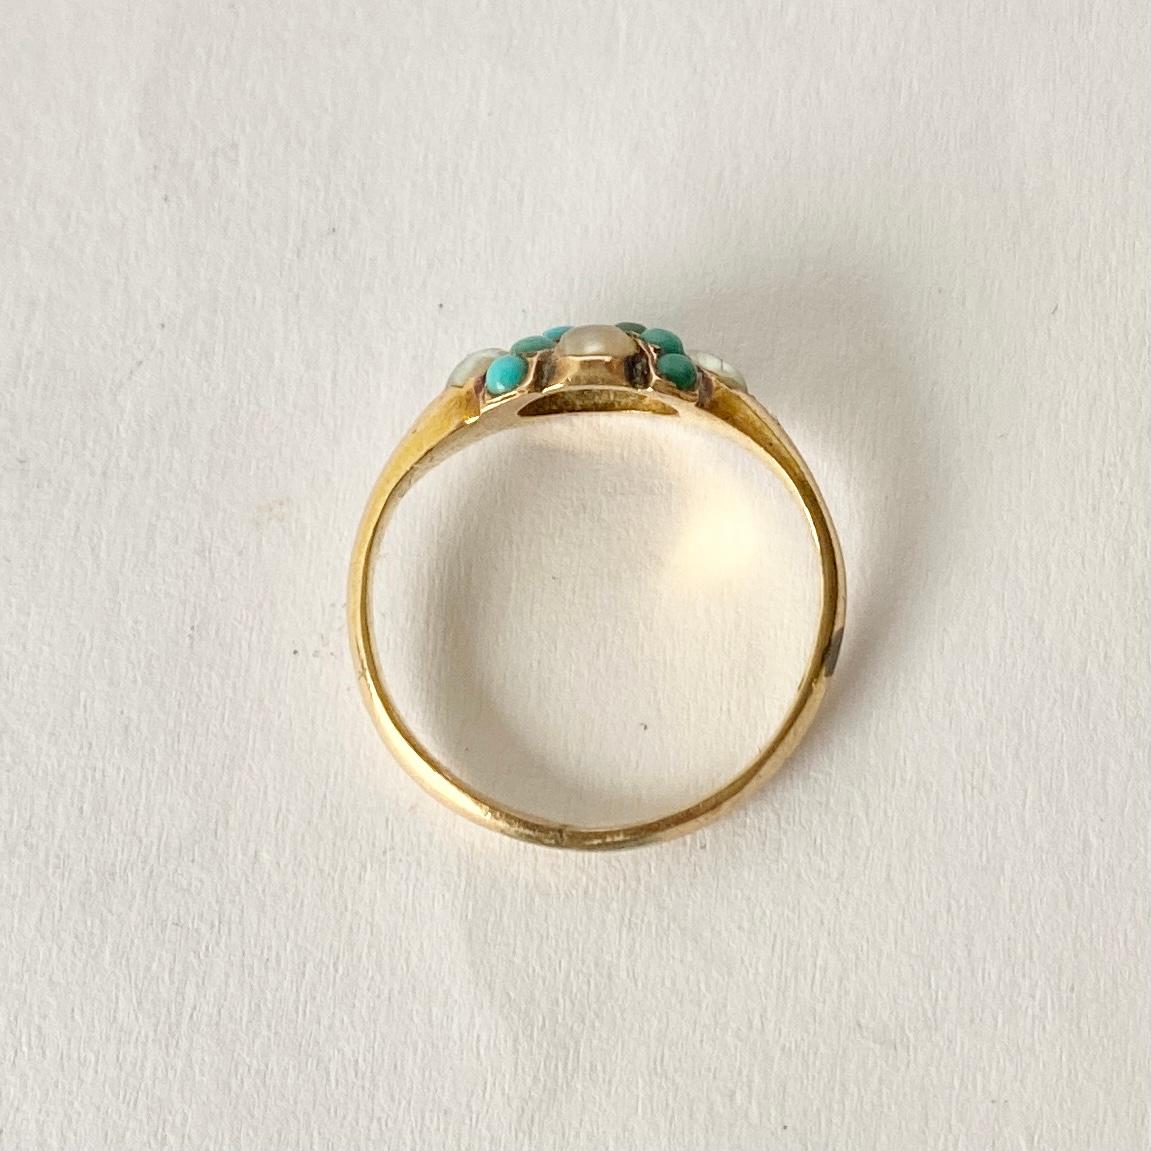 The turquoise stones set within this ring almost make up a X 'kiss' shape and four pearls are set around them. The ring is modelled in 9ct gold.

Ring Size: J or 4 3/4 
Band Width: 8mm 

Weight: 2g 